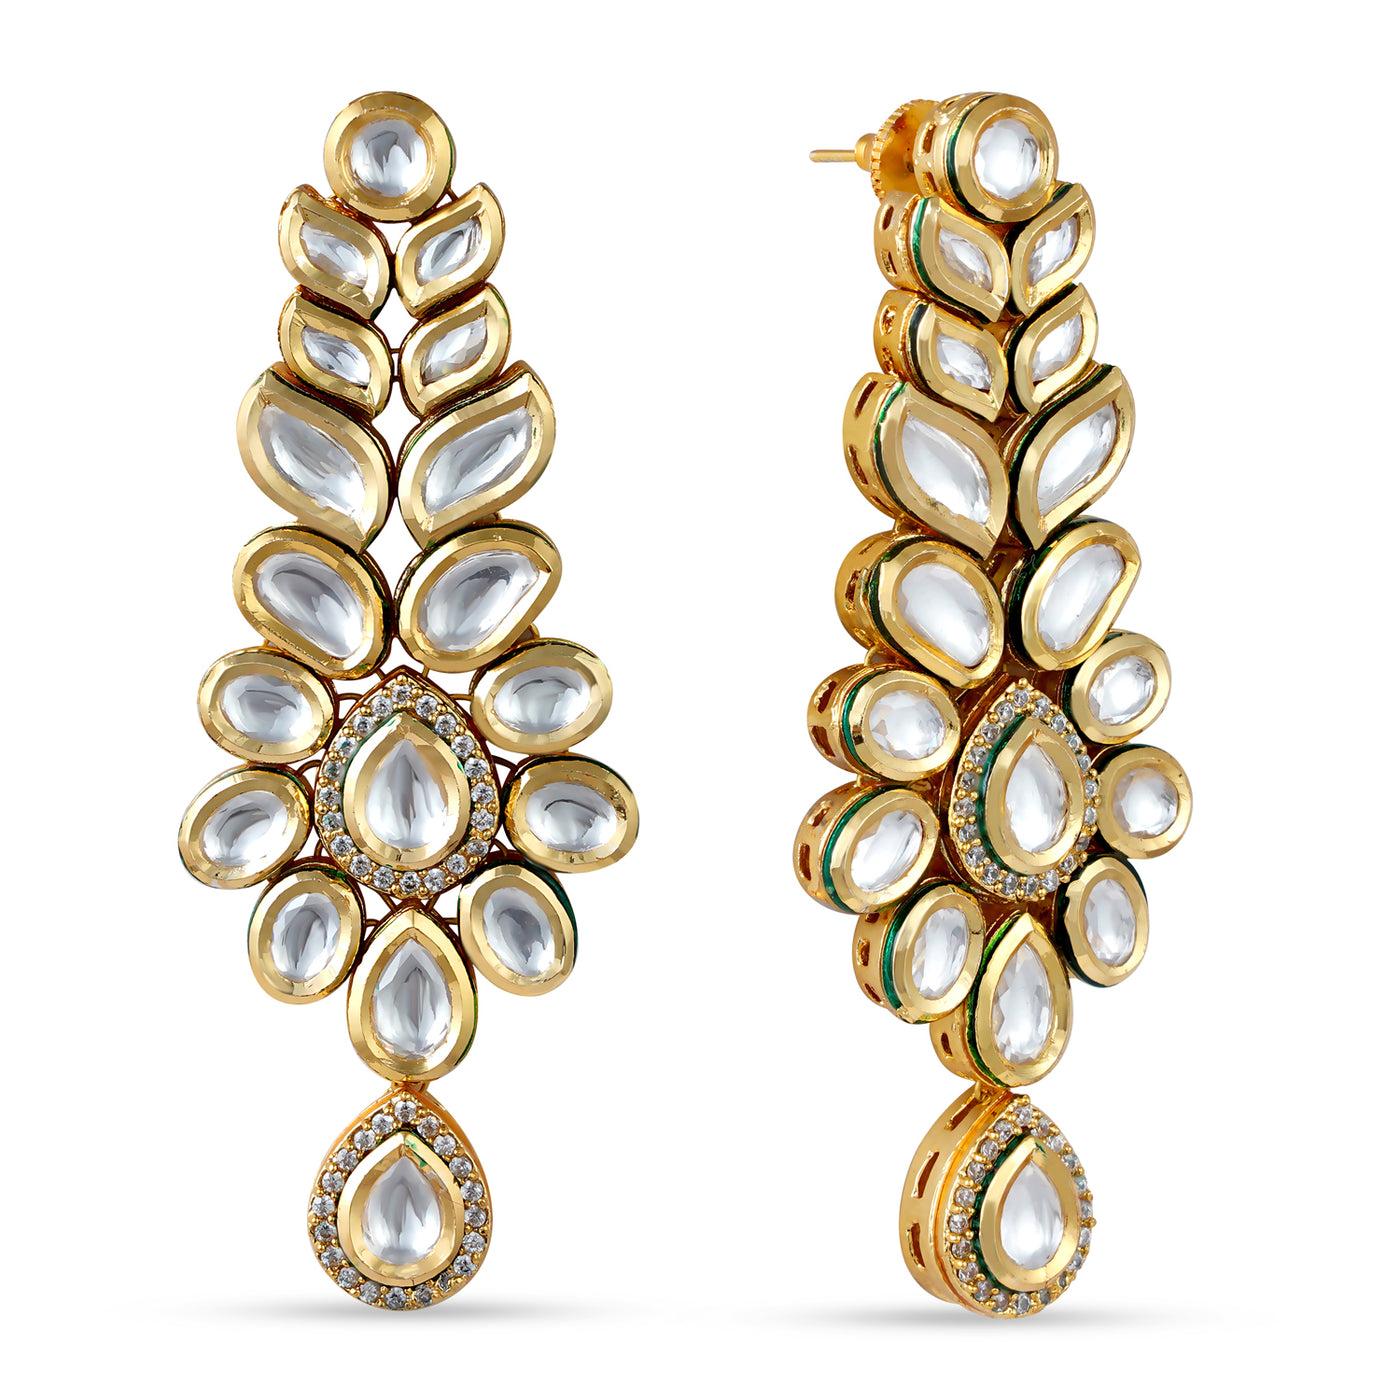 Classic Kundan Drop Earrings. Front View and Side View.